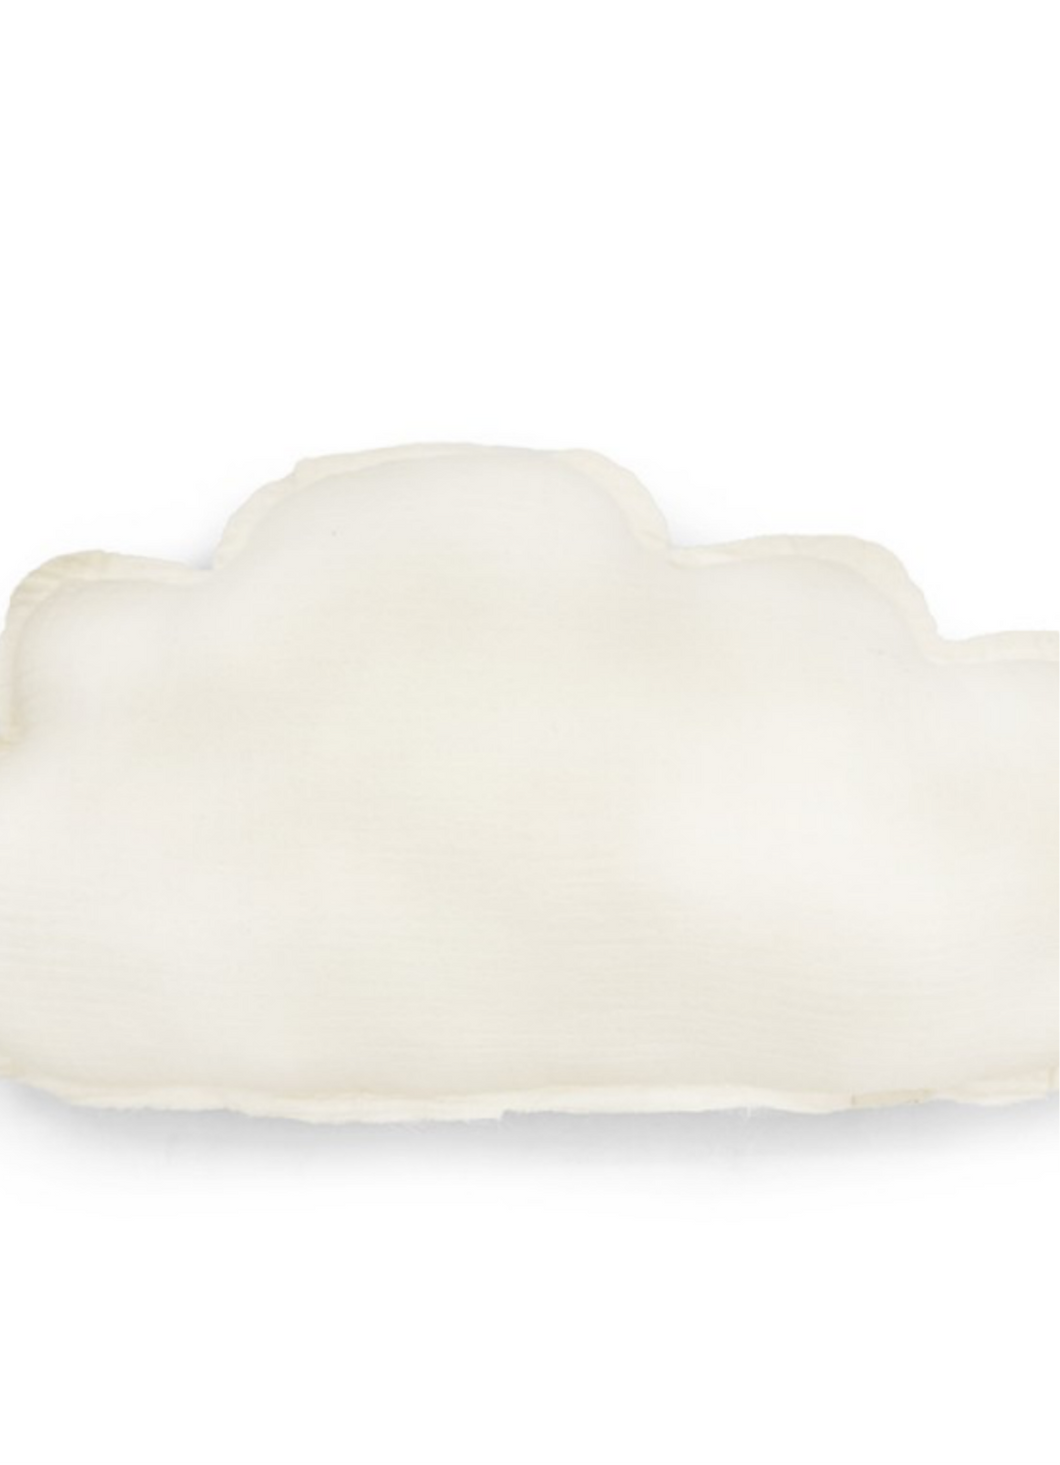 Baby shower coussin nuage